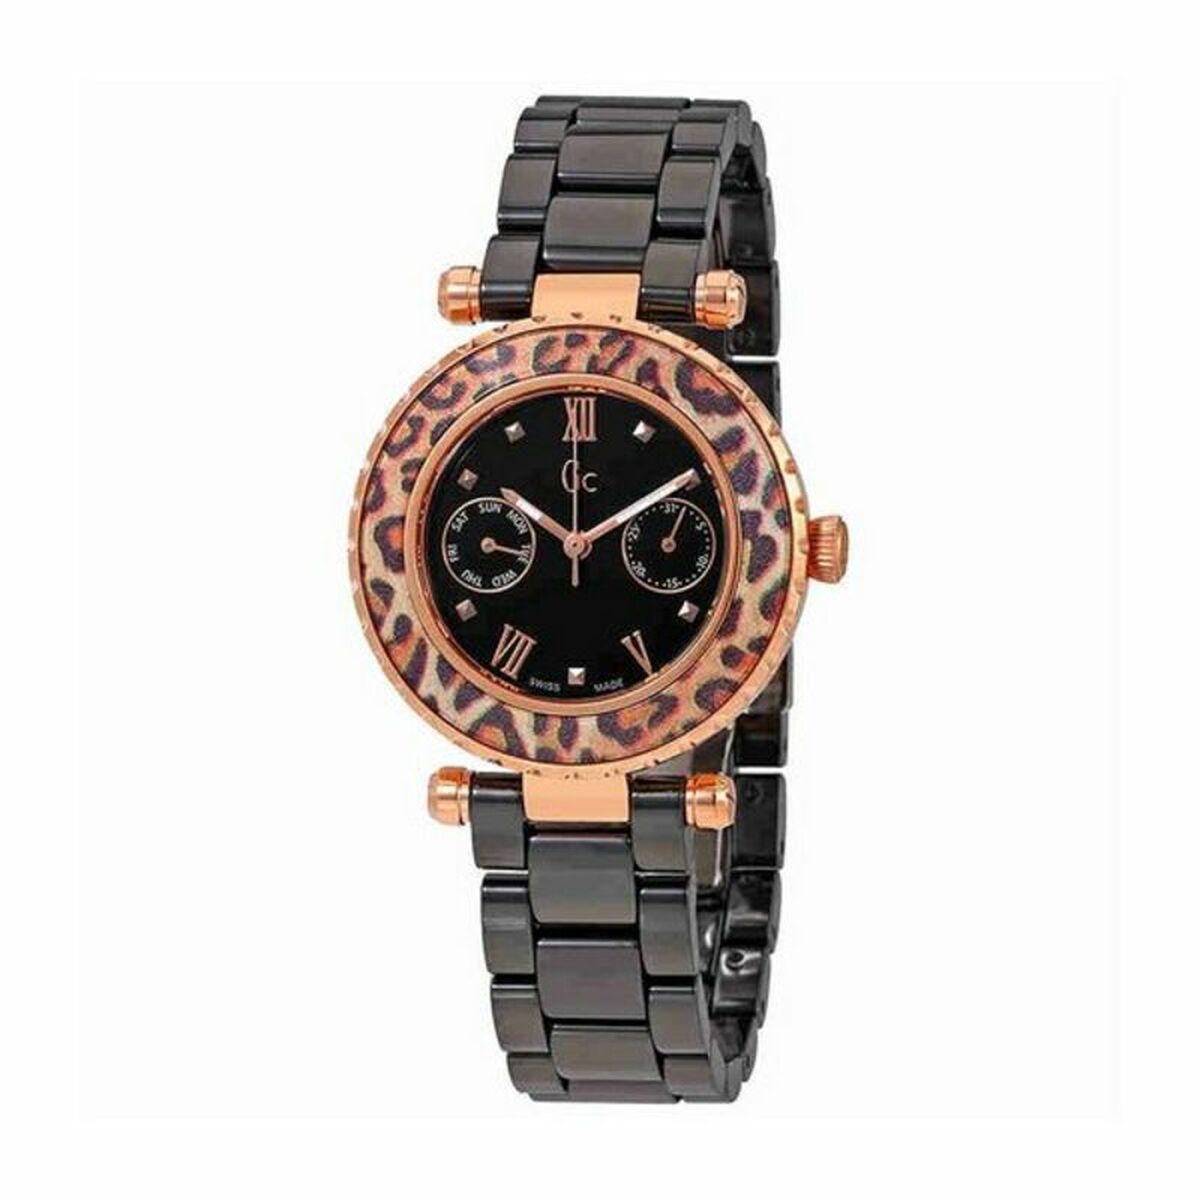 Ladies'Watch Guess X35016L2S (Ø 34 mm), Guess, Watches, Women, ladieswatch-guess-x35016l2s-o-34-mm, : Quartz Movement, :Gold, Brand_Guess, category-reference-2570, category-reference-2635, category-reference-2995, category-reference-t-19667, category-reference-t-19725, Condition_NEW, fashion, gifts for women, original gifts, Price_100 - 200, RiotNook